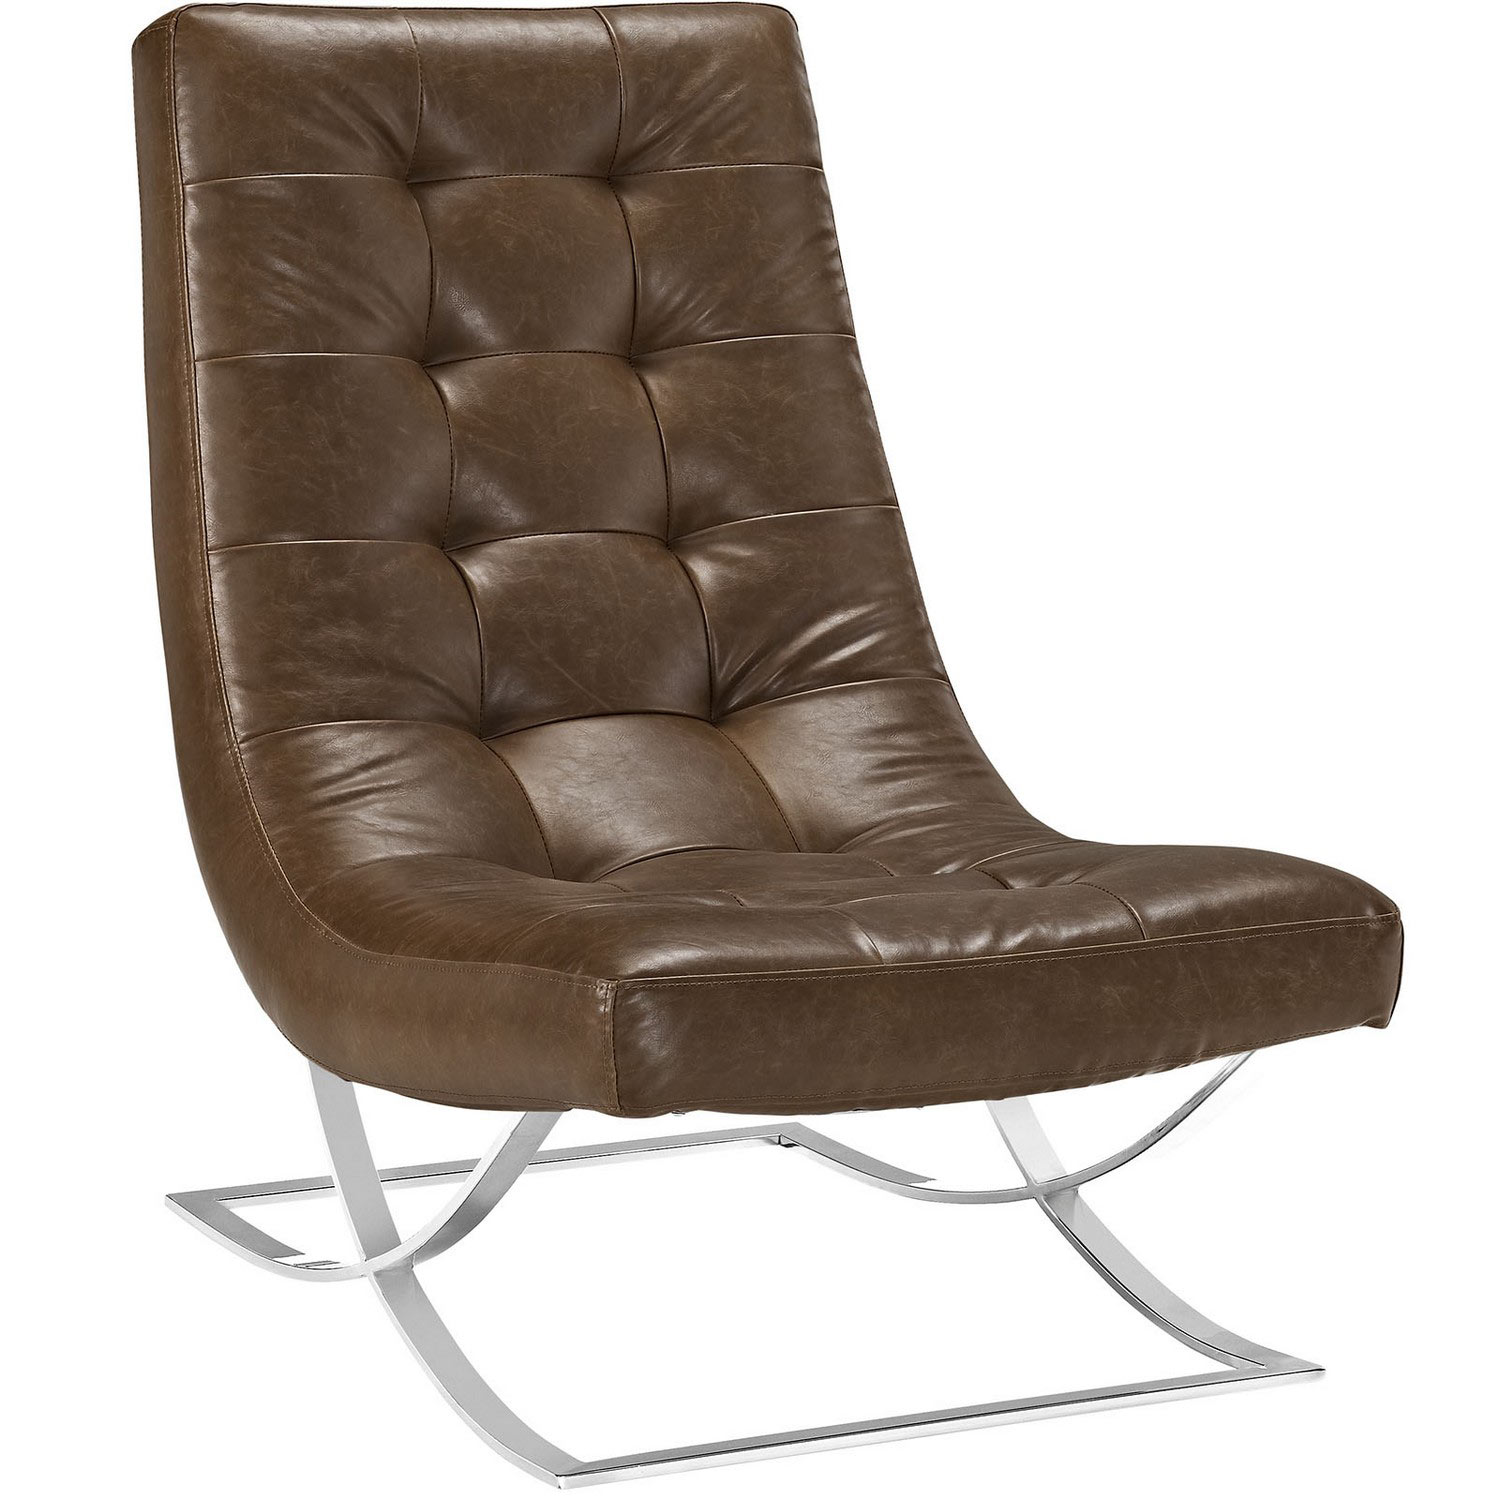 Modway Slope Lounge Chair - Brown